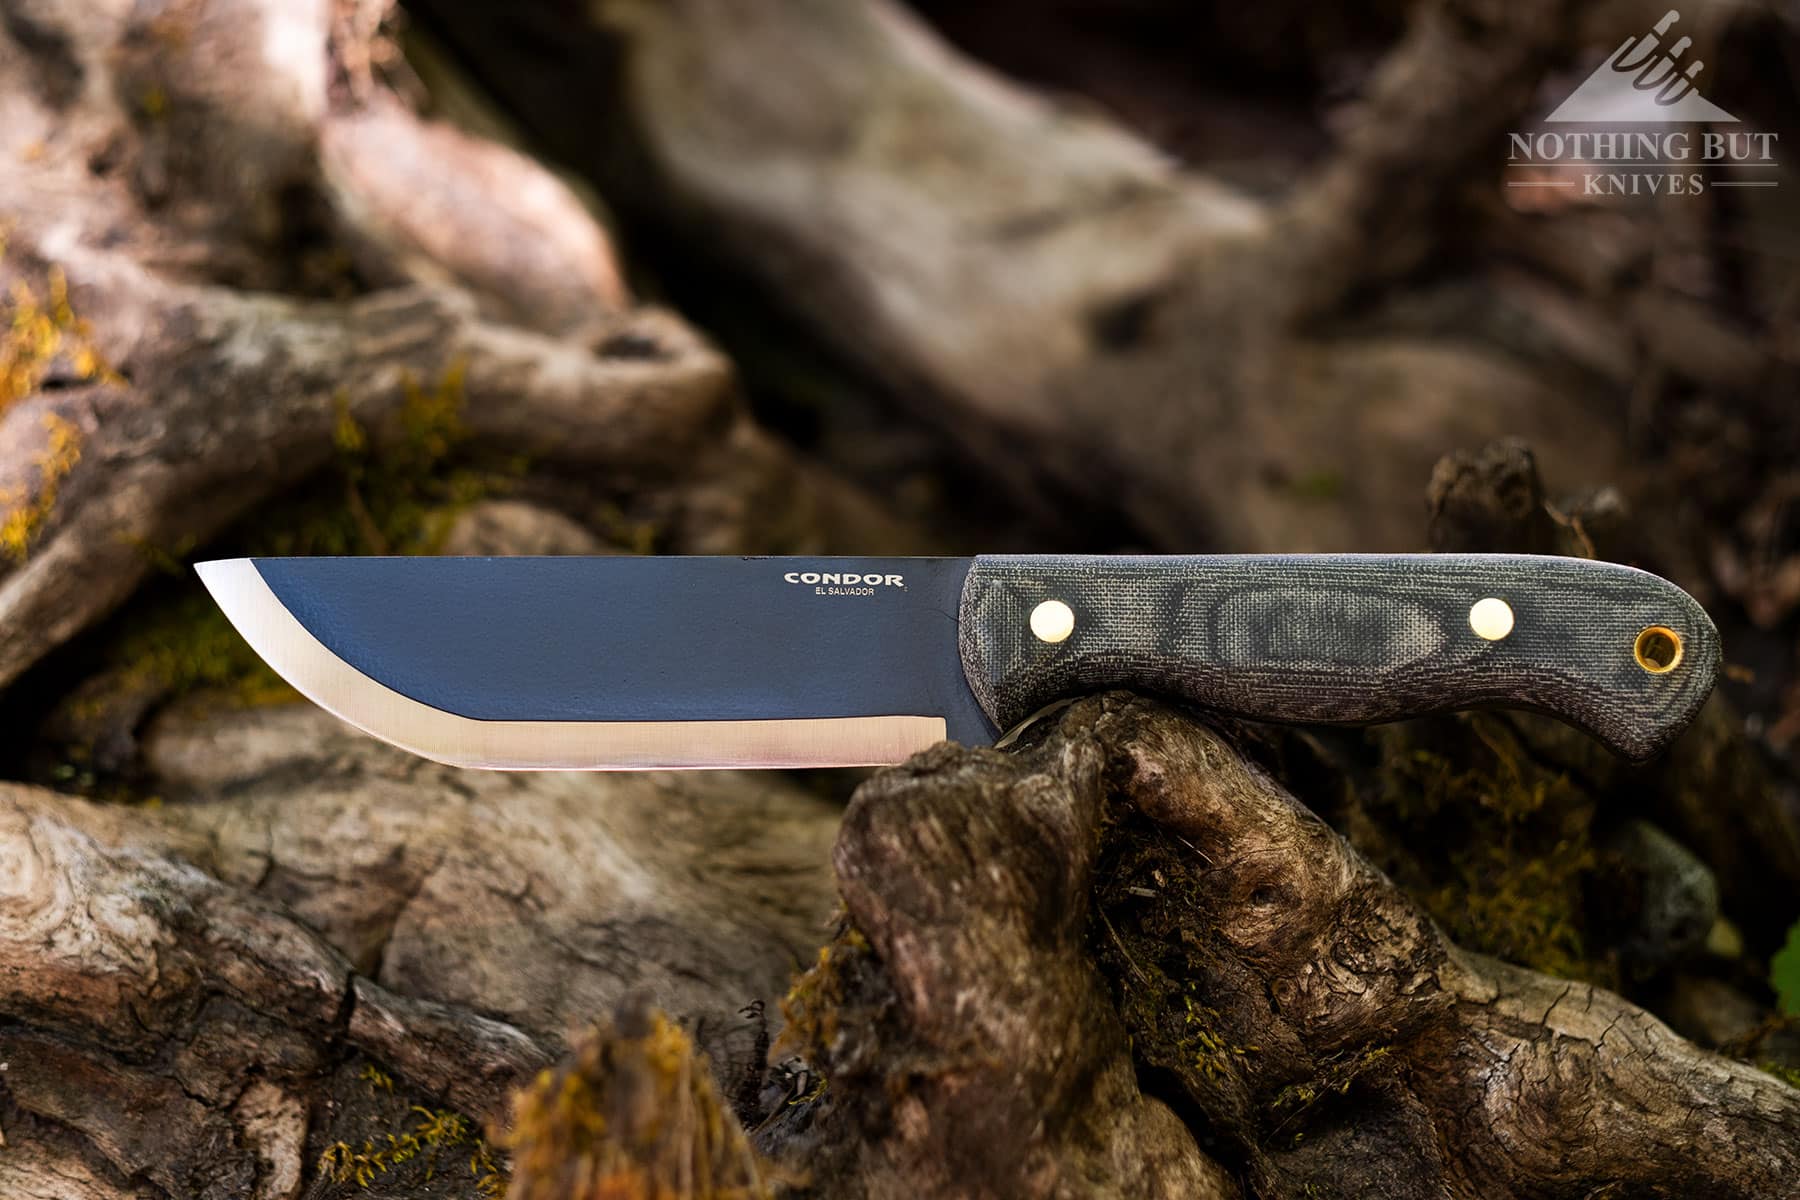 The Condor SBK survival knife on a piece of moss covered driftwood.